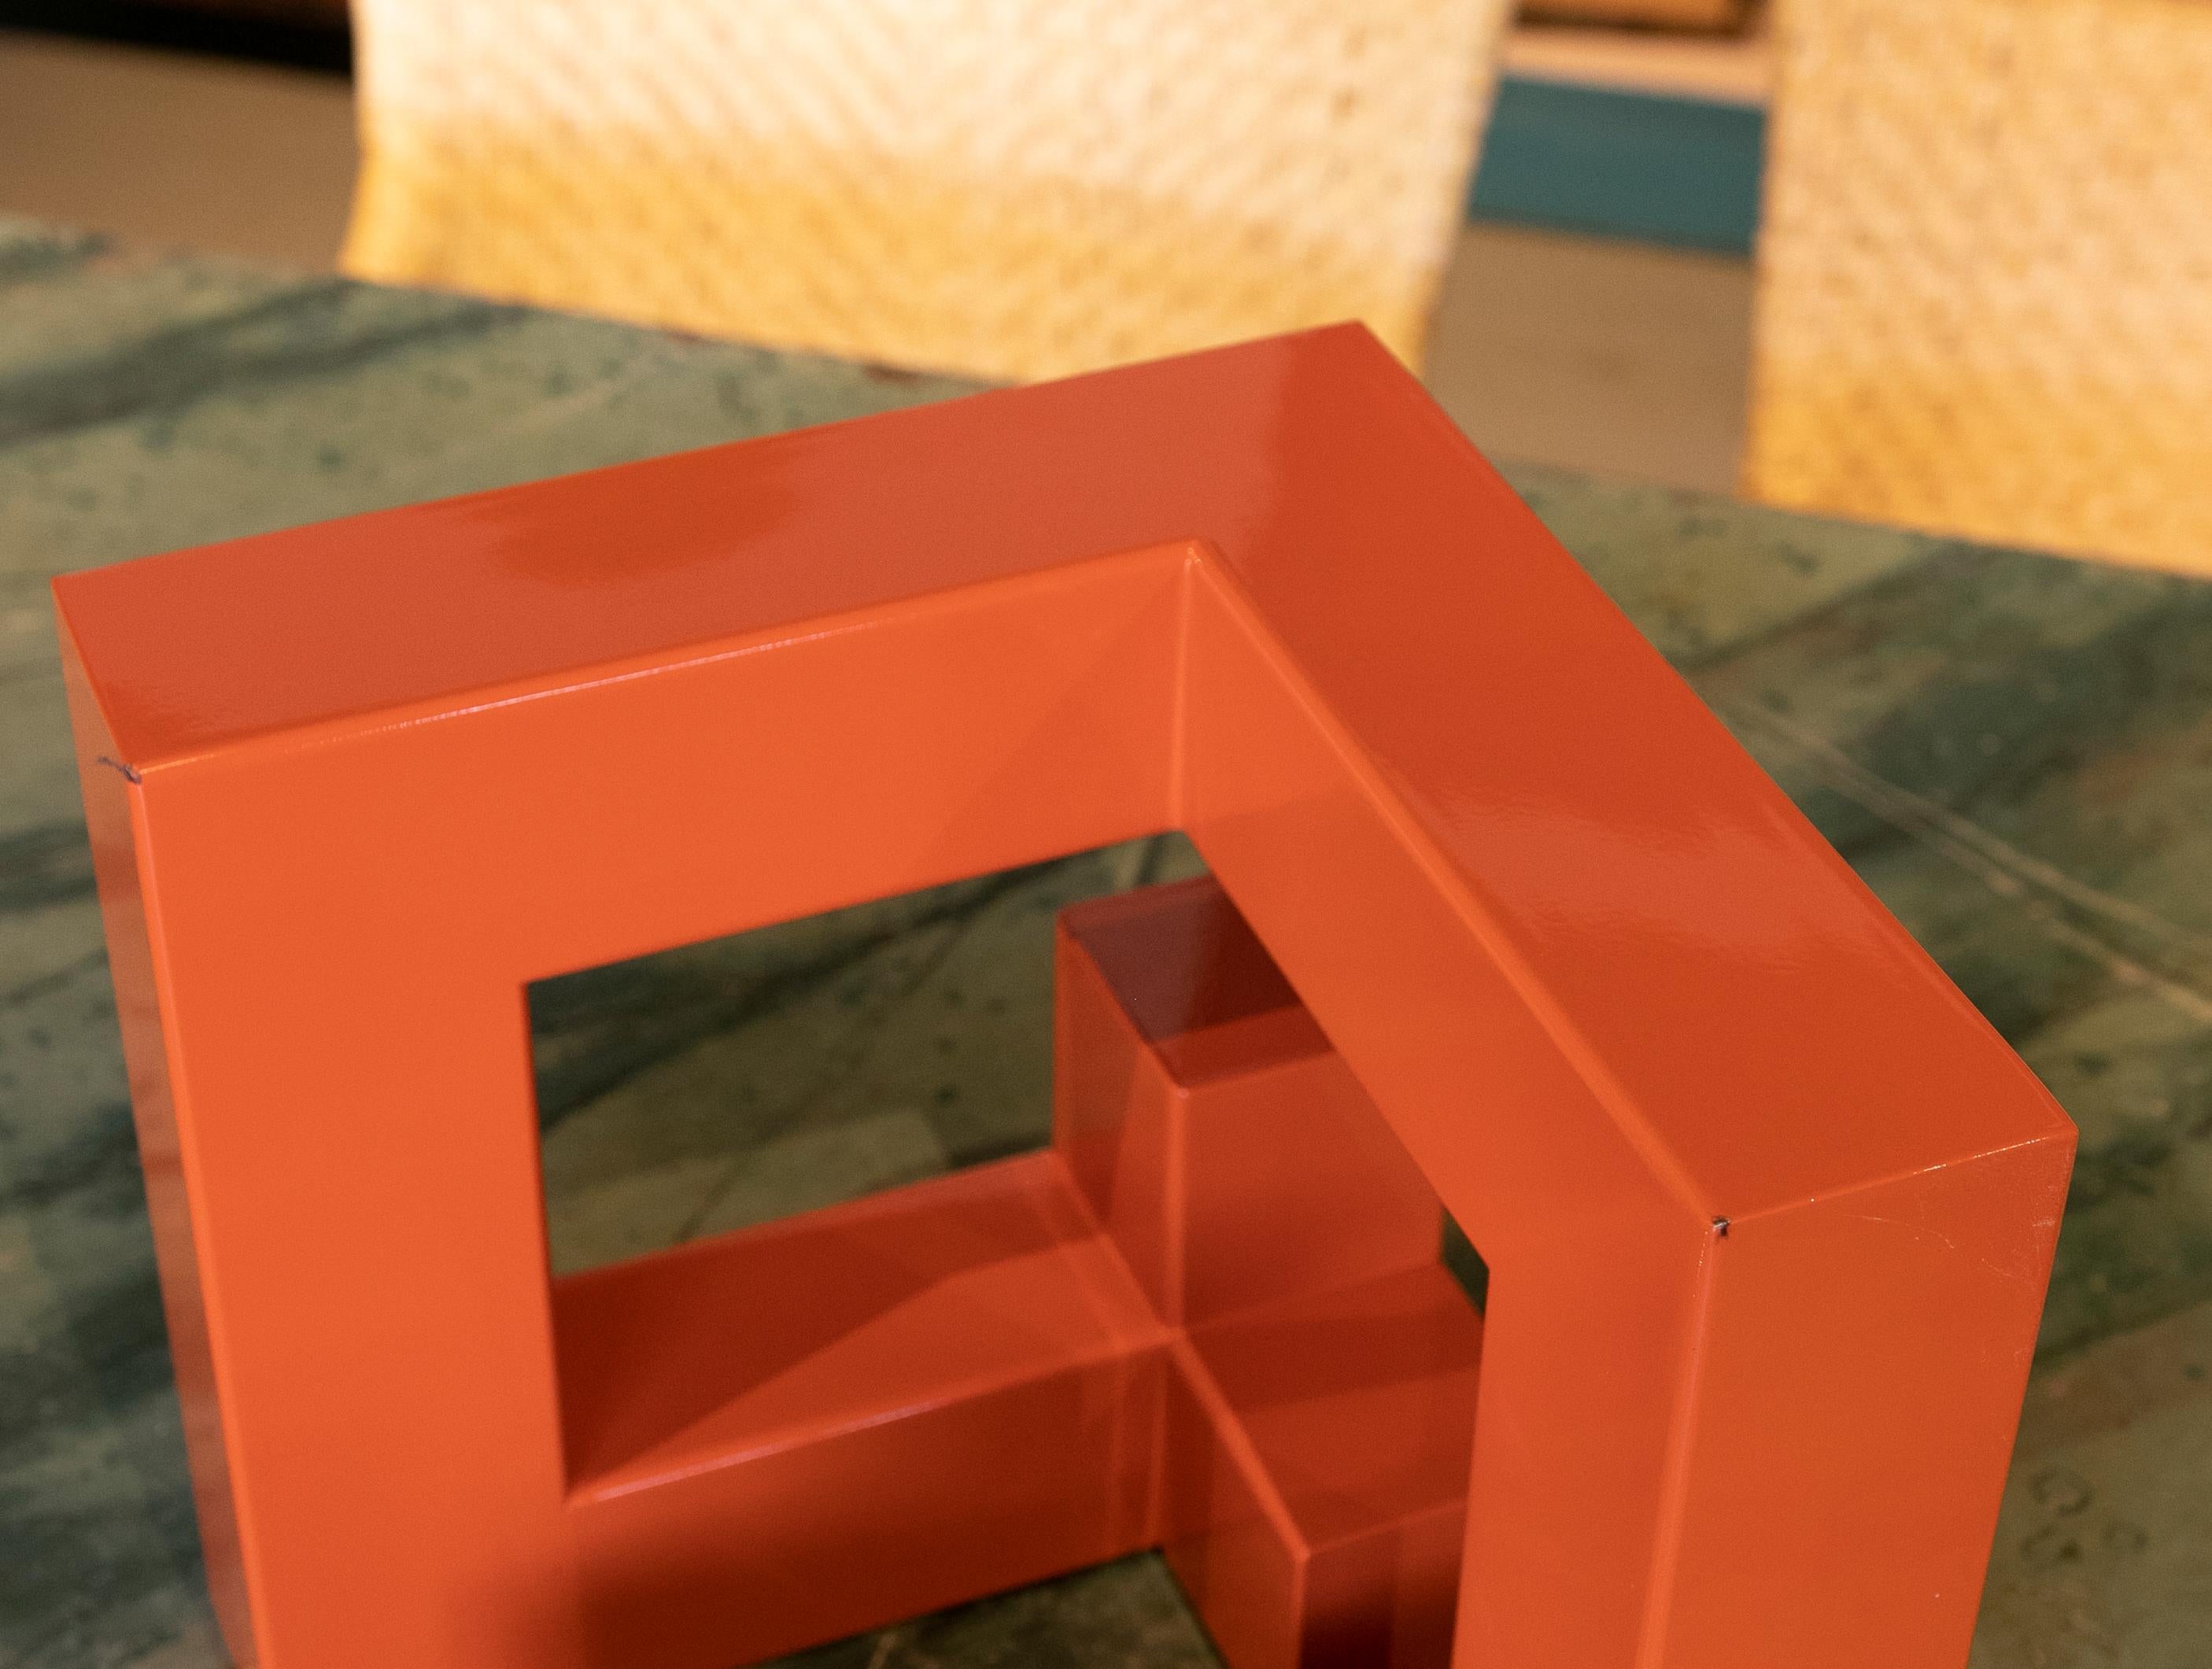 Abstract Metal Sculpture Lacquered in Orange with Geometric Forms 11